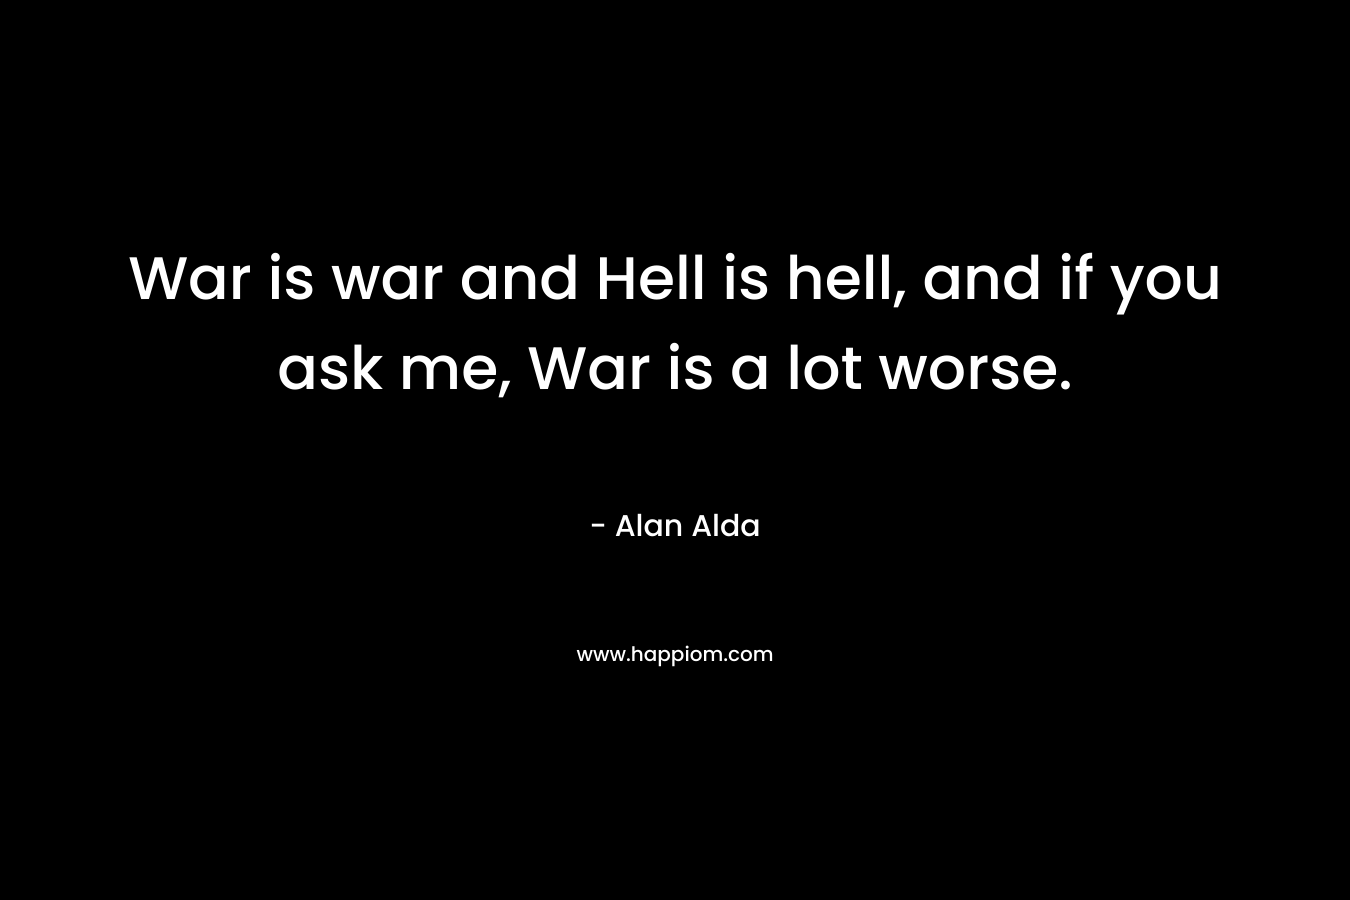 War is war and Hell is hell, and if you ask me, War is a lot worse. – Alan Alda